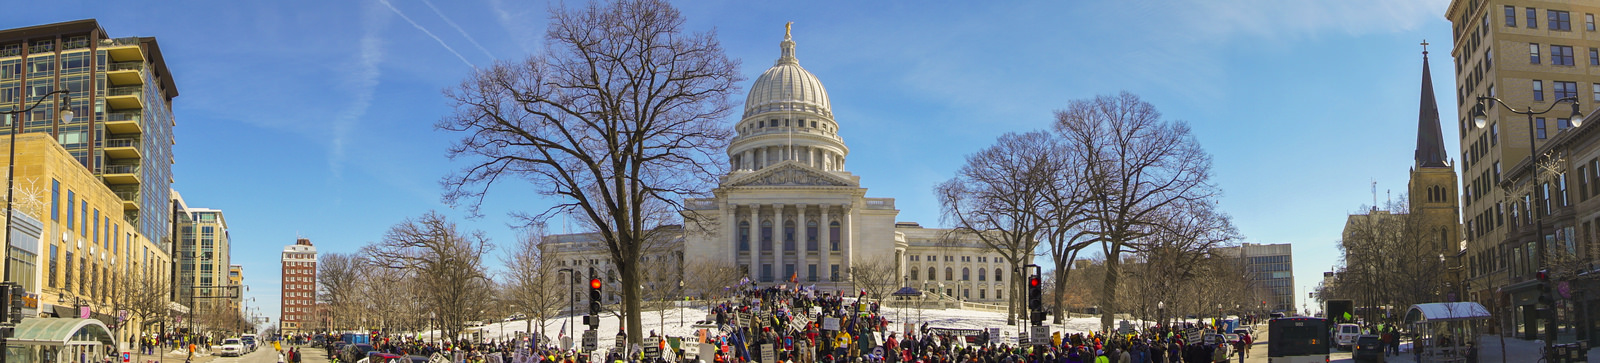 Panorama of the capitol of Wisconsin